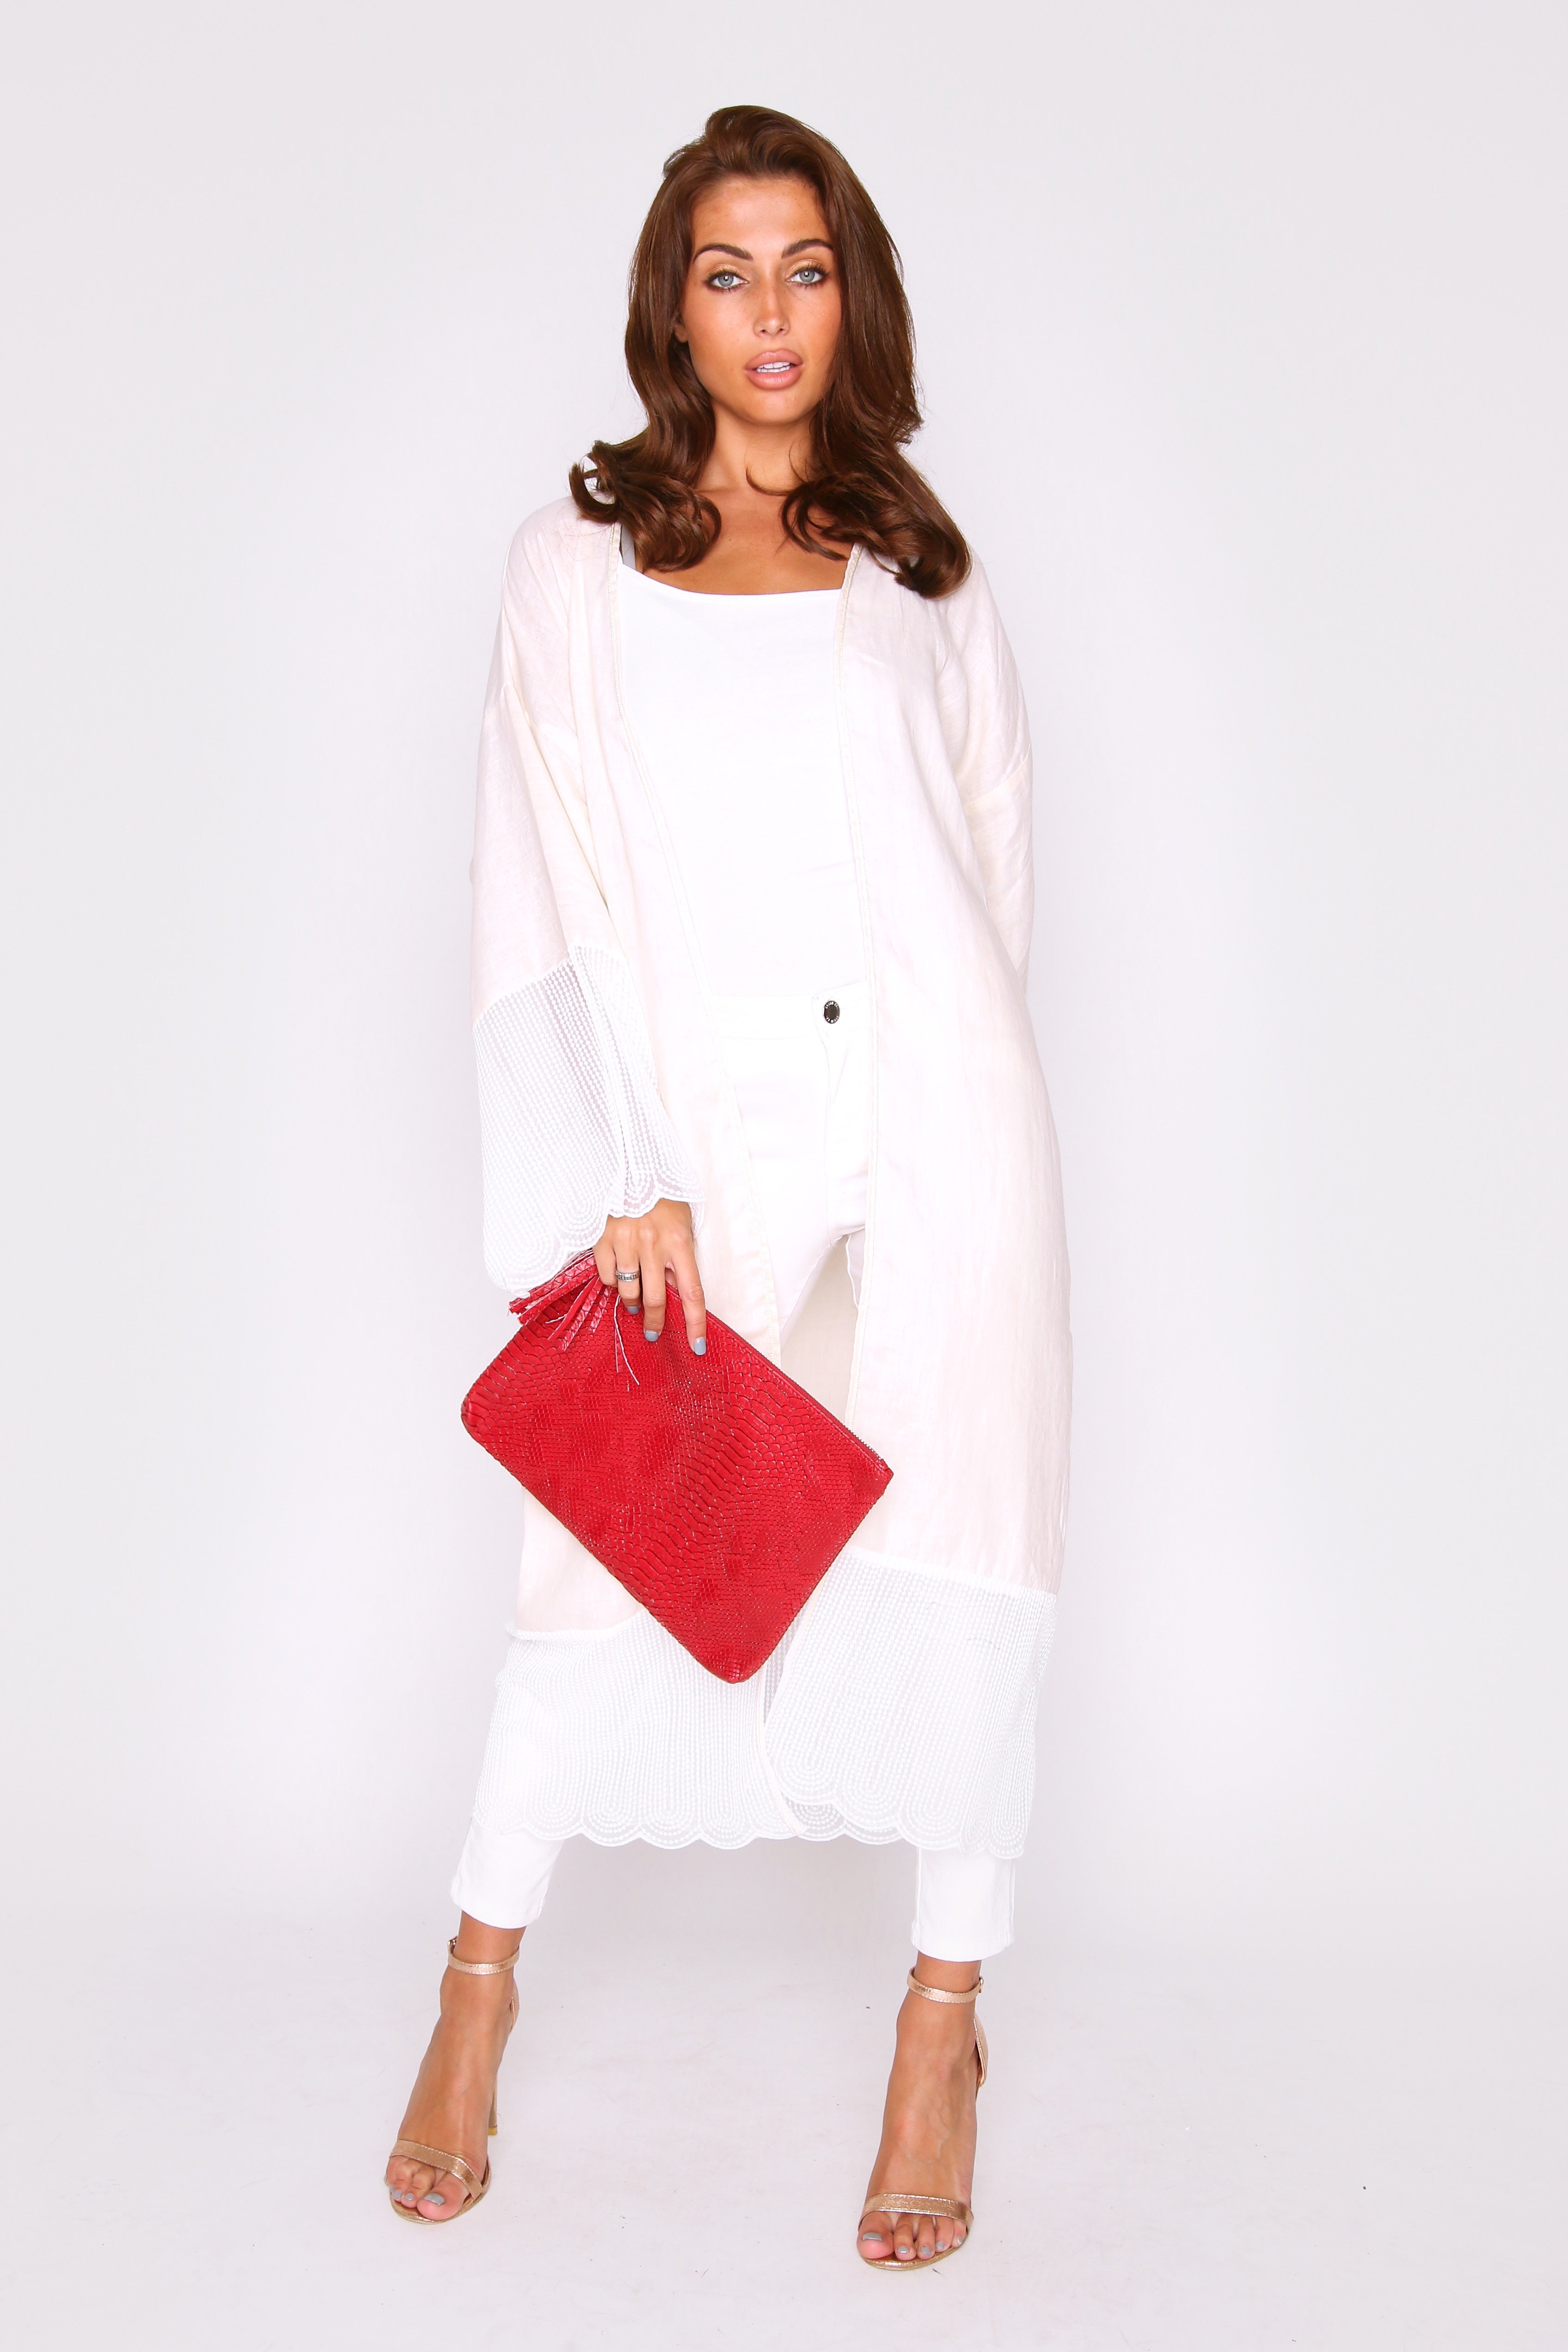 Kimono Emna Cover-Up Long Sleeve Duster Jacket in White